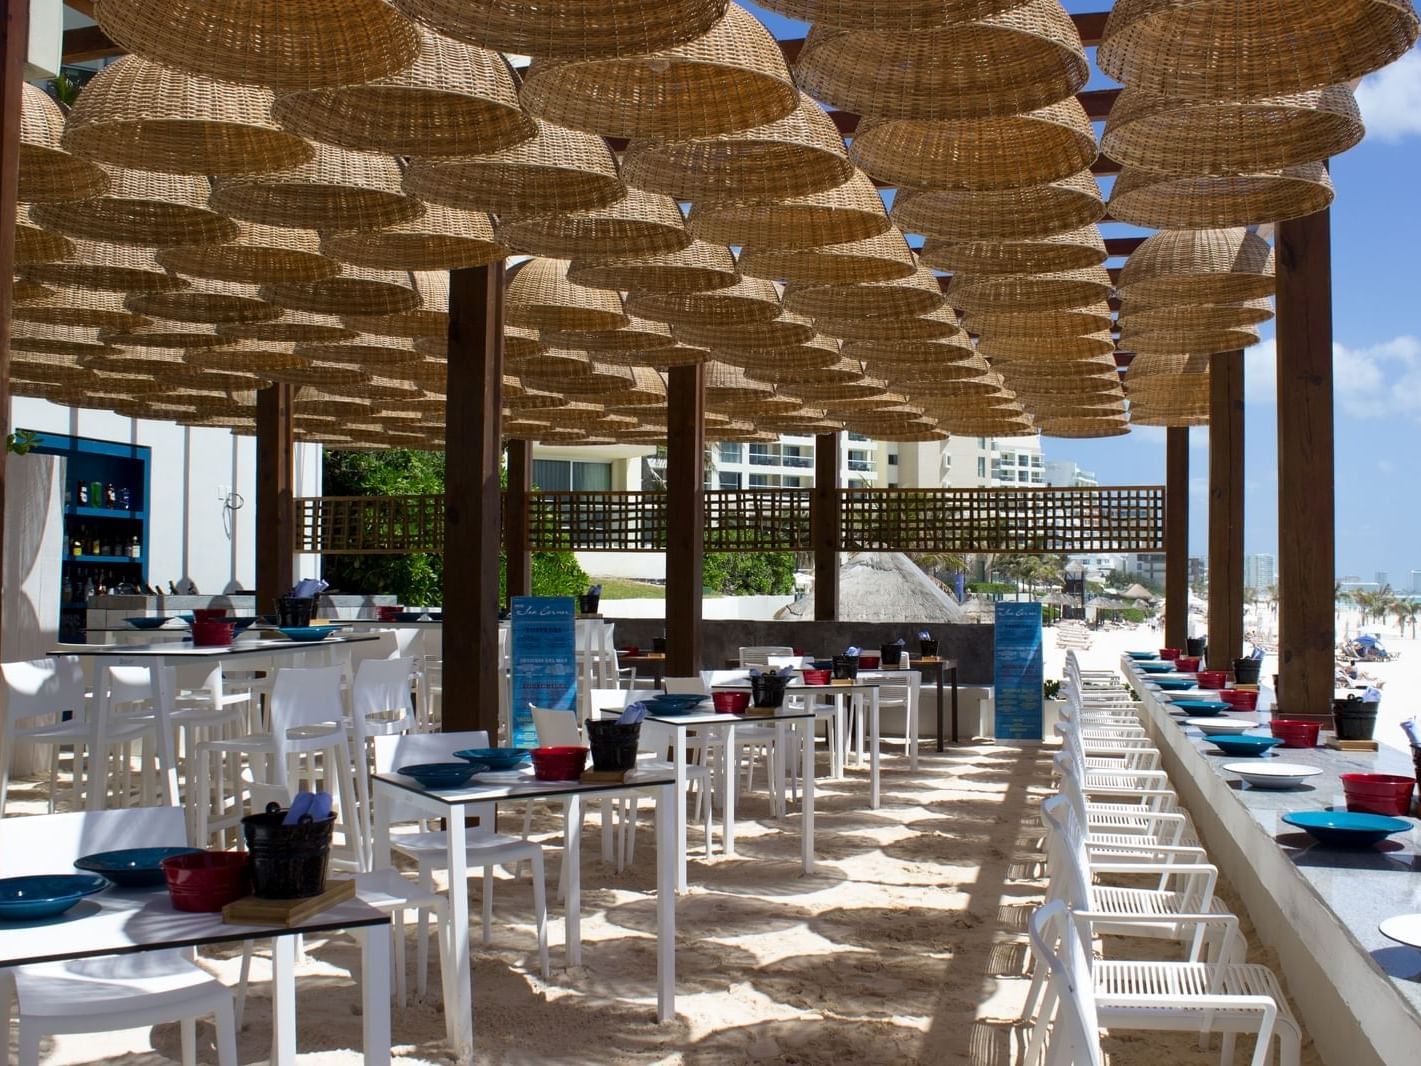 outdoor restaurant dining area with tables and chairs